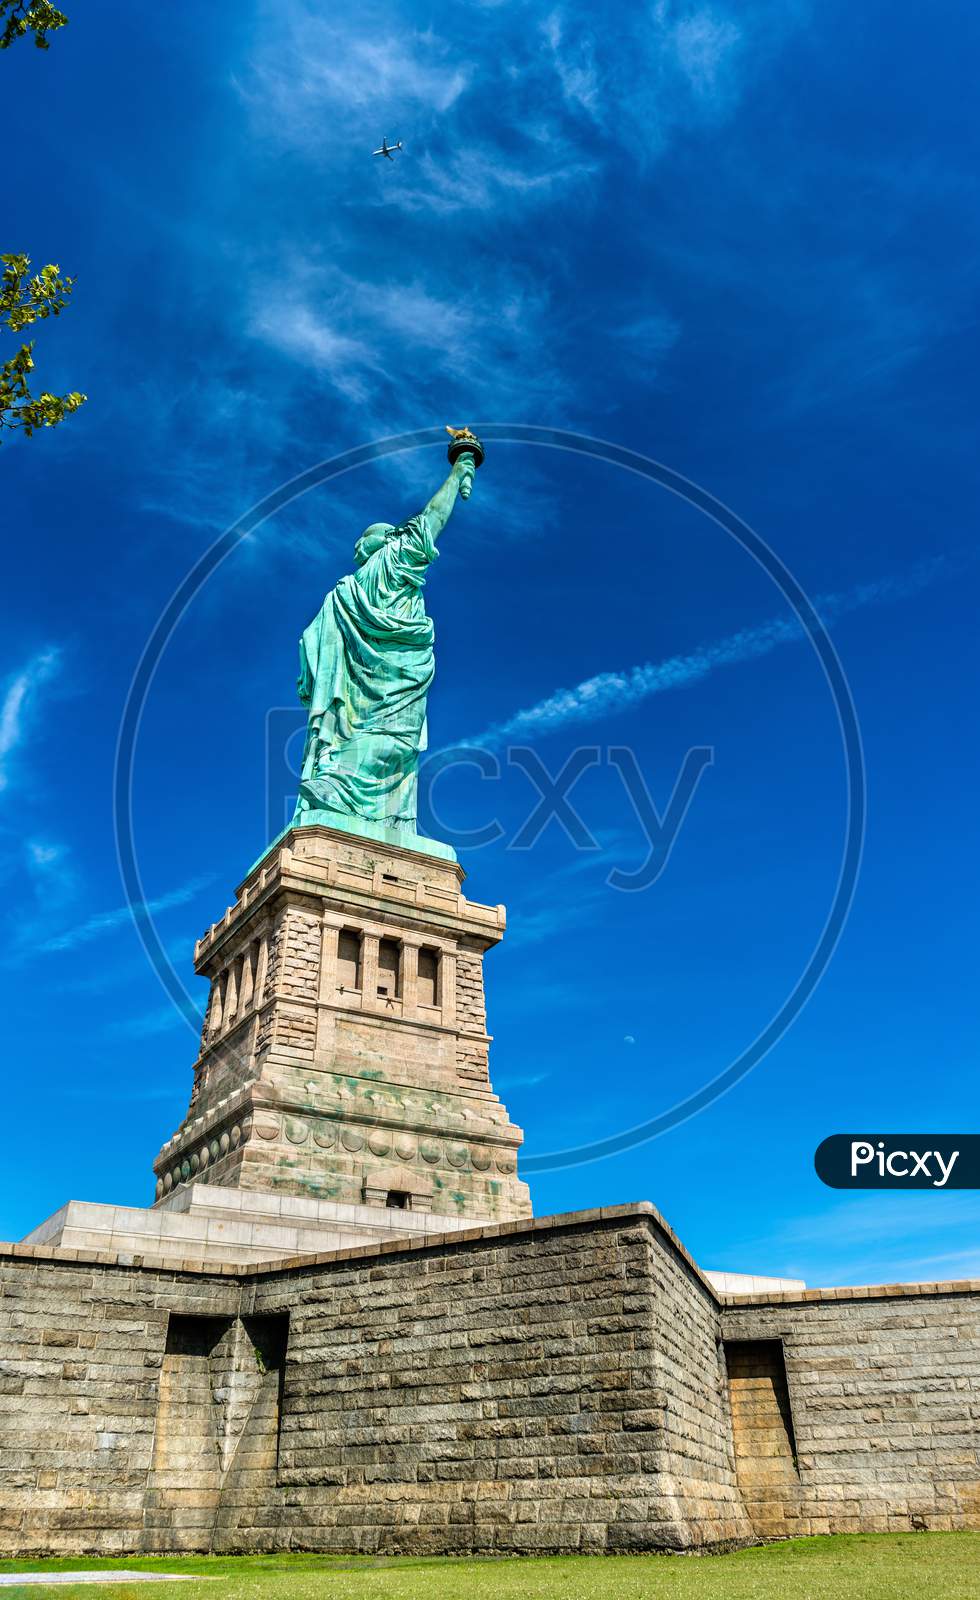 The Statue Of Liberty On Liberty Island In New York City